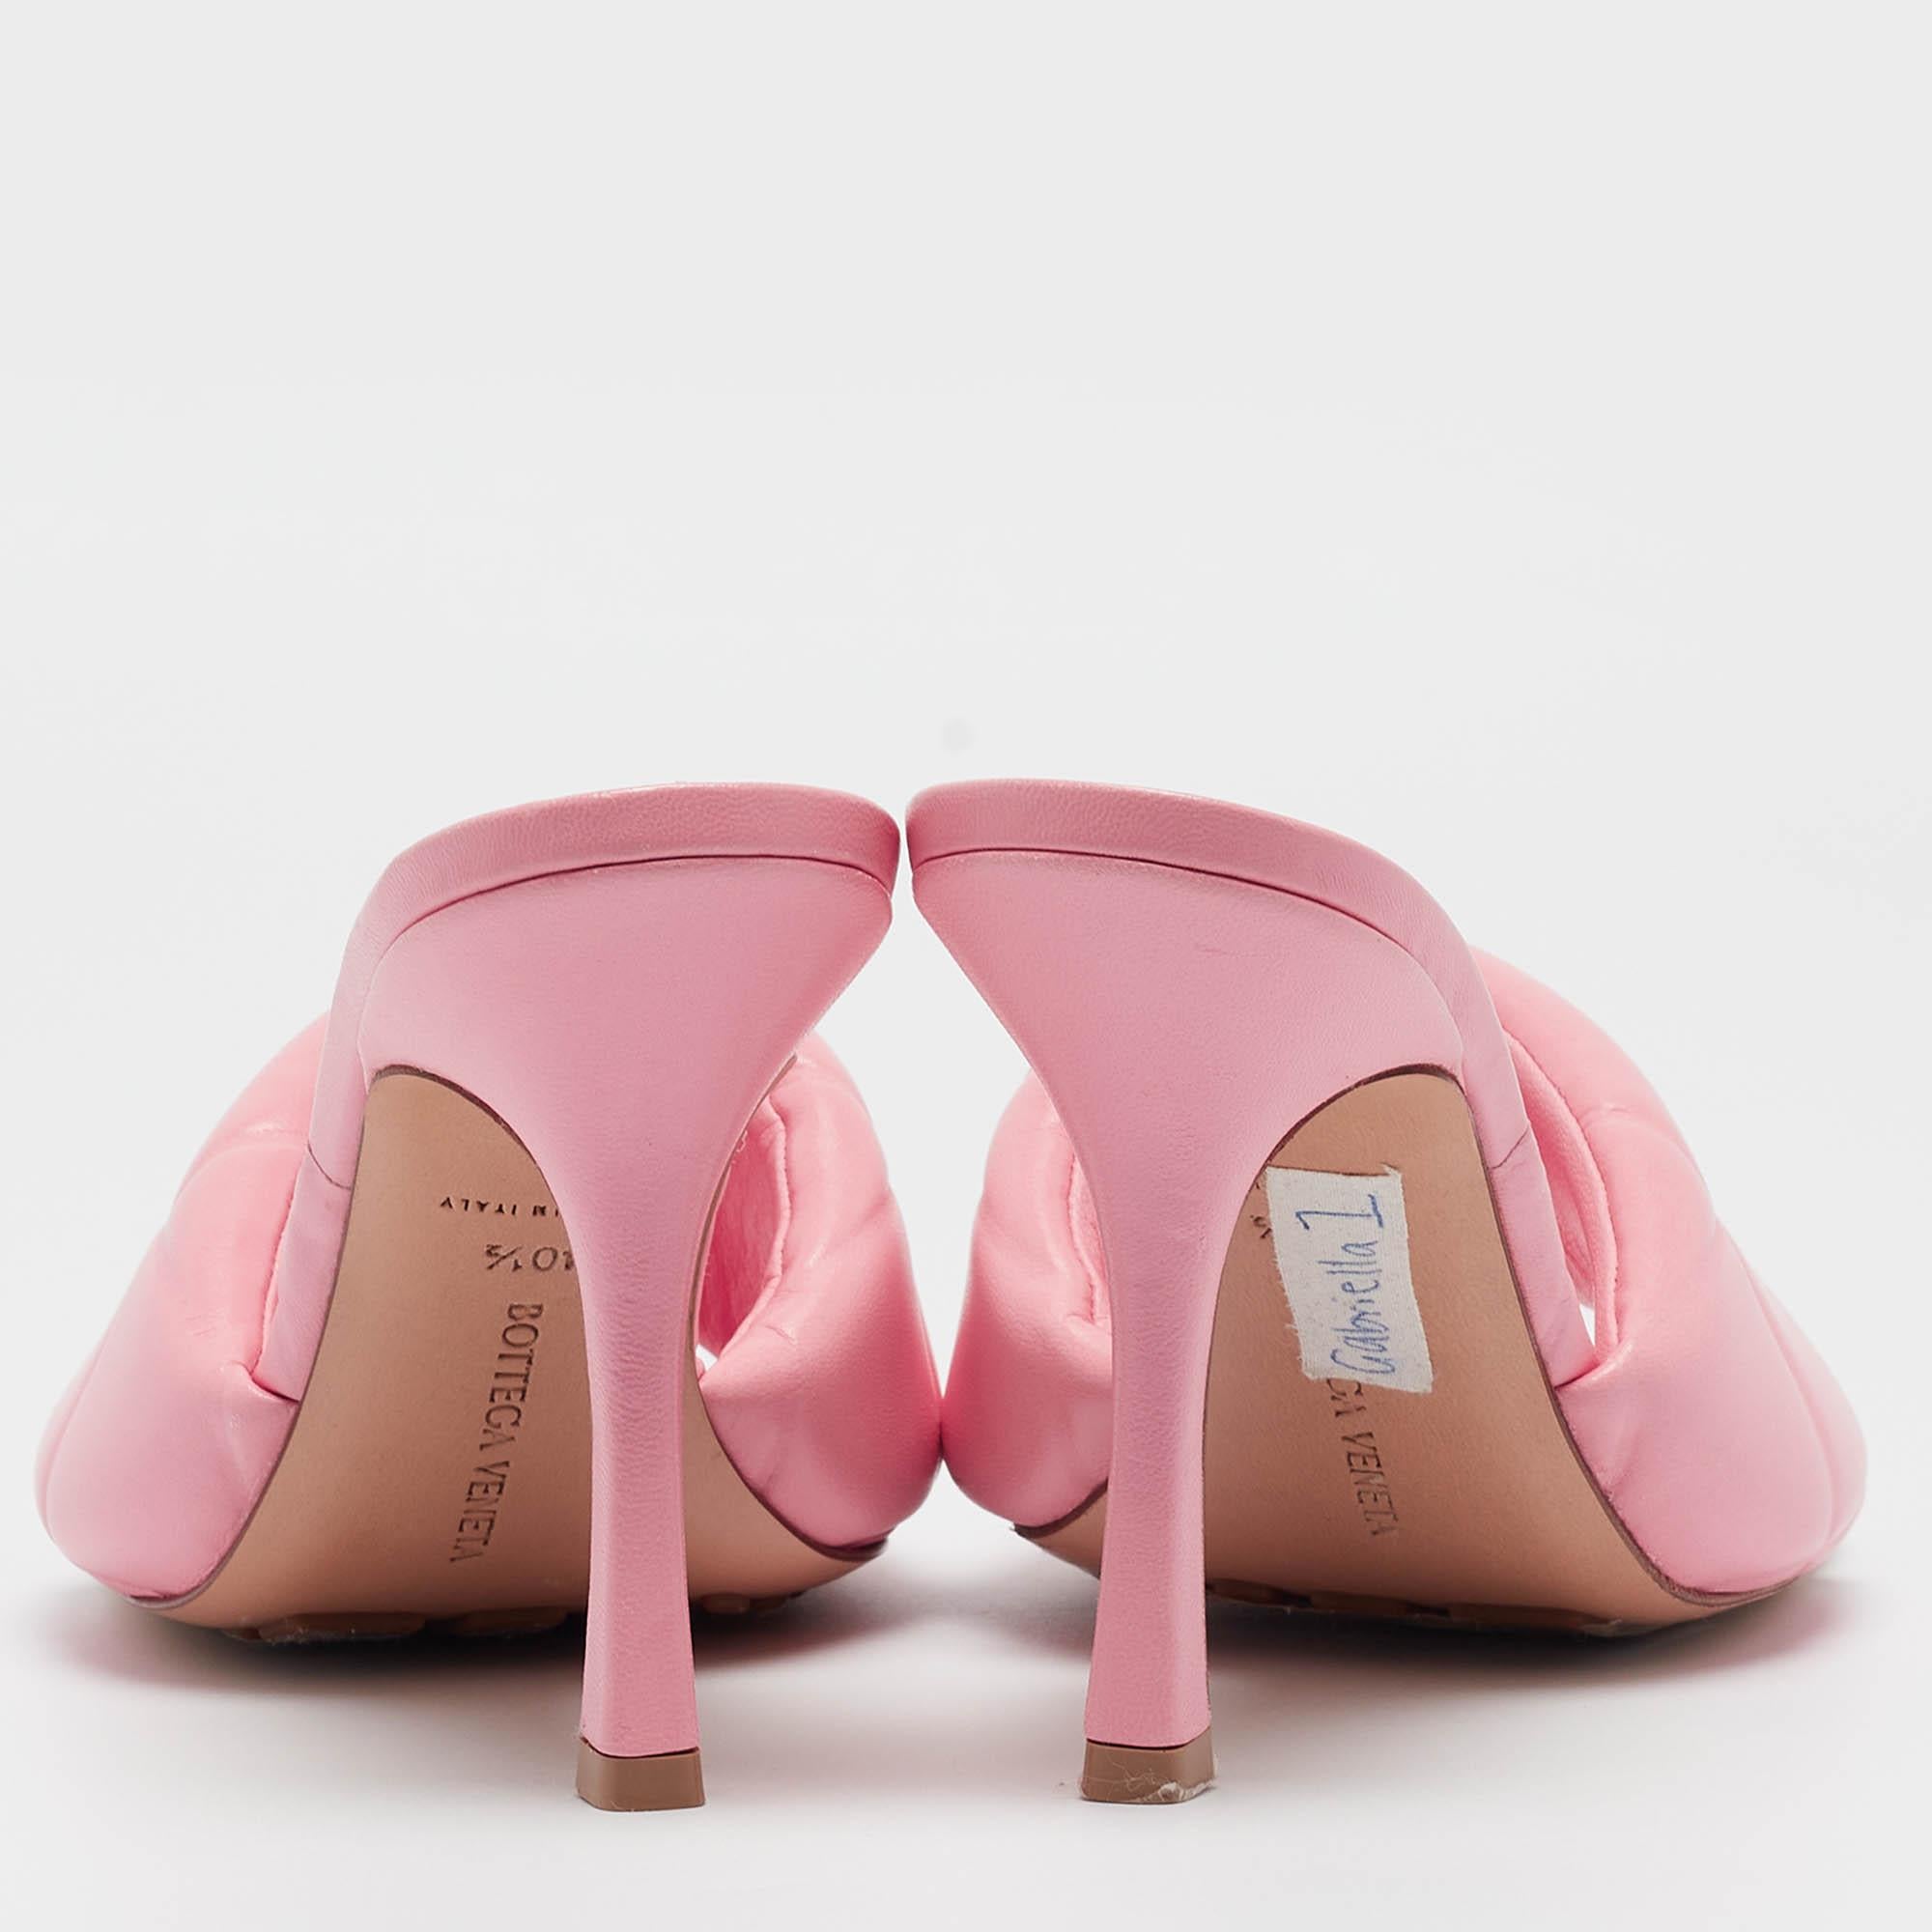 These slides are one of the most hot-selling designs from Bottega Veneta. These beauties have been crafted from pink leather. The upper strap is designed in a padded style with quilting and the sandals are set on 10cm heels.

Includes: Original